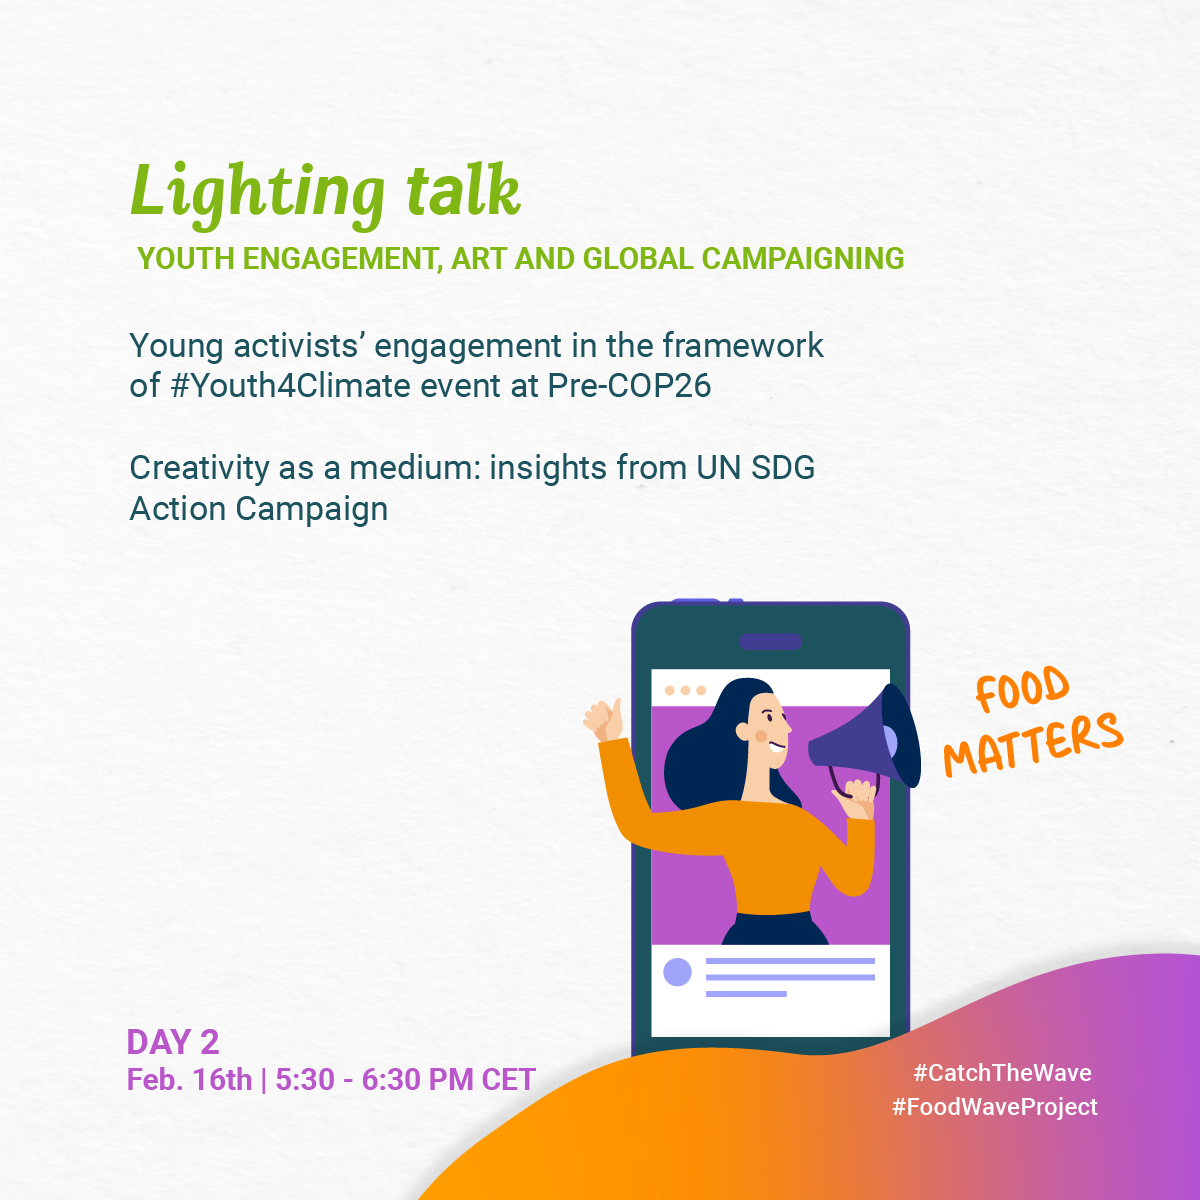 Lightning talk: youth engagement, art and global campaigning